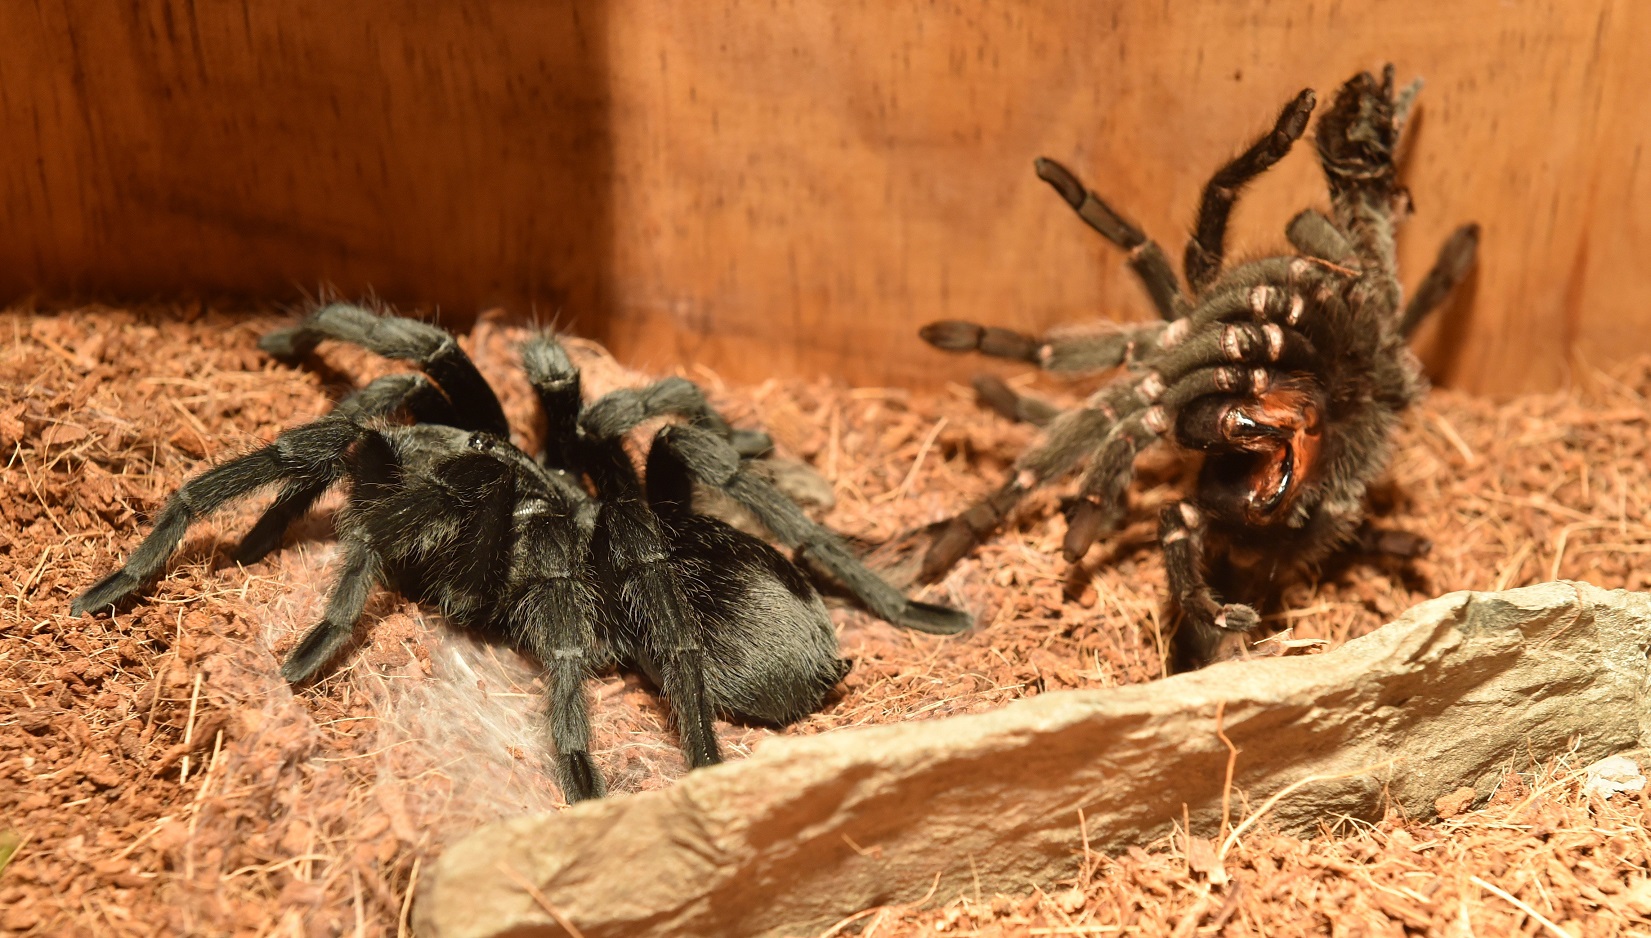 A recently-moulted tarantula (left) and its discarded skin. Photo: Gregor Richardson